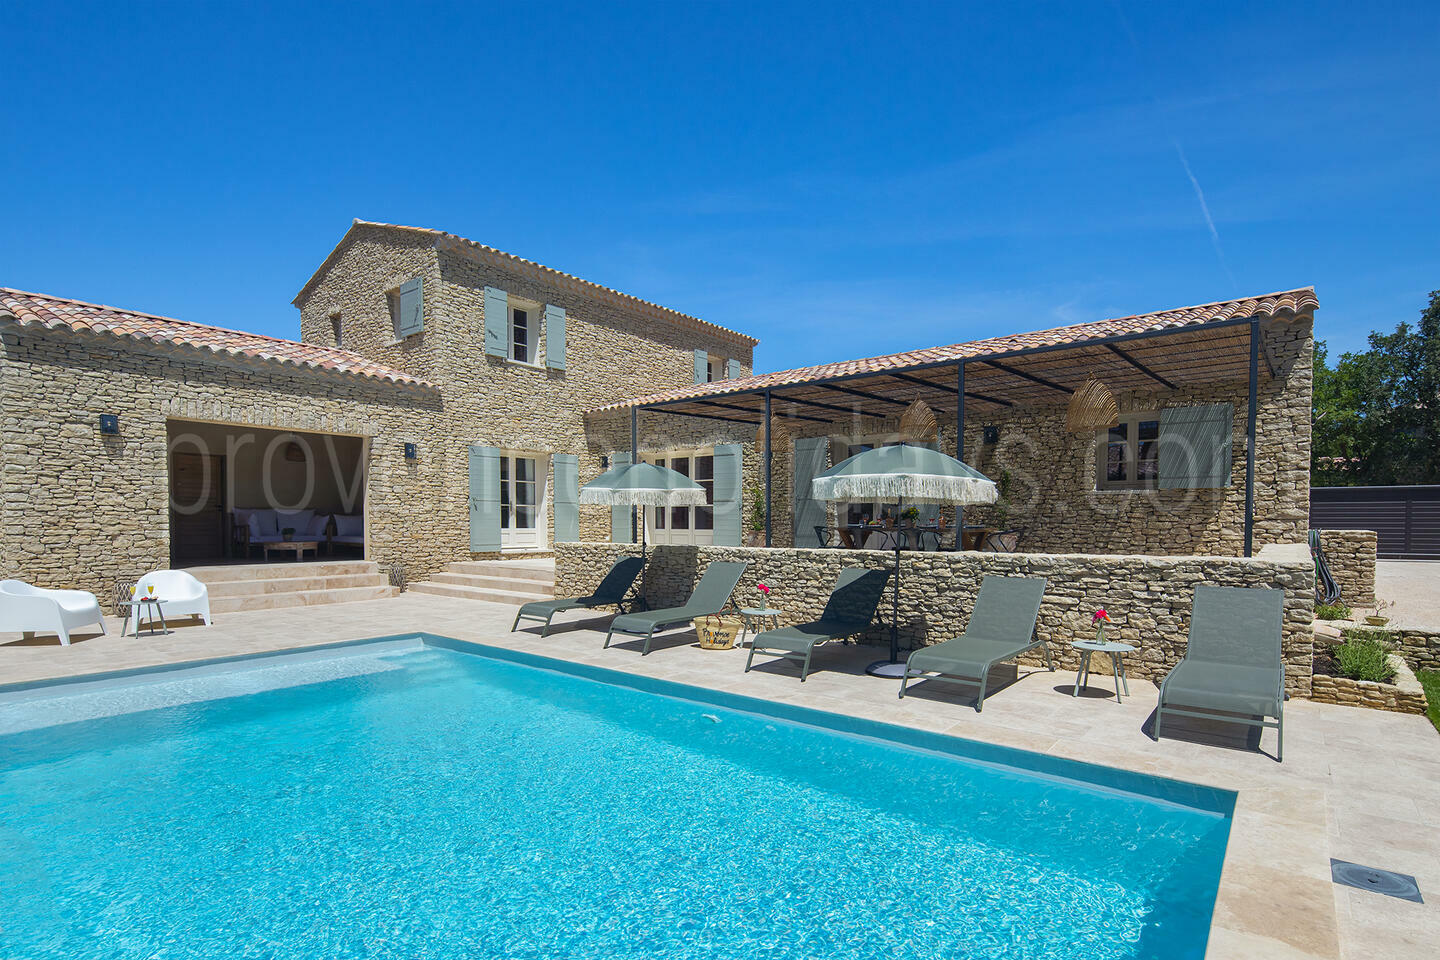 Beautiful Holiday Rental with Air Conditioning near Gordes 1 - Mas de Fontblanche: Villa: Pool